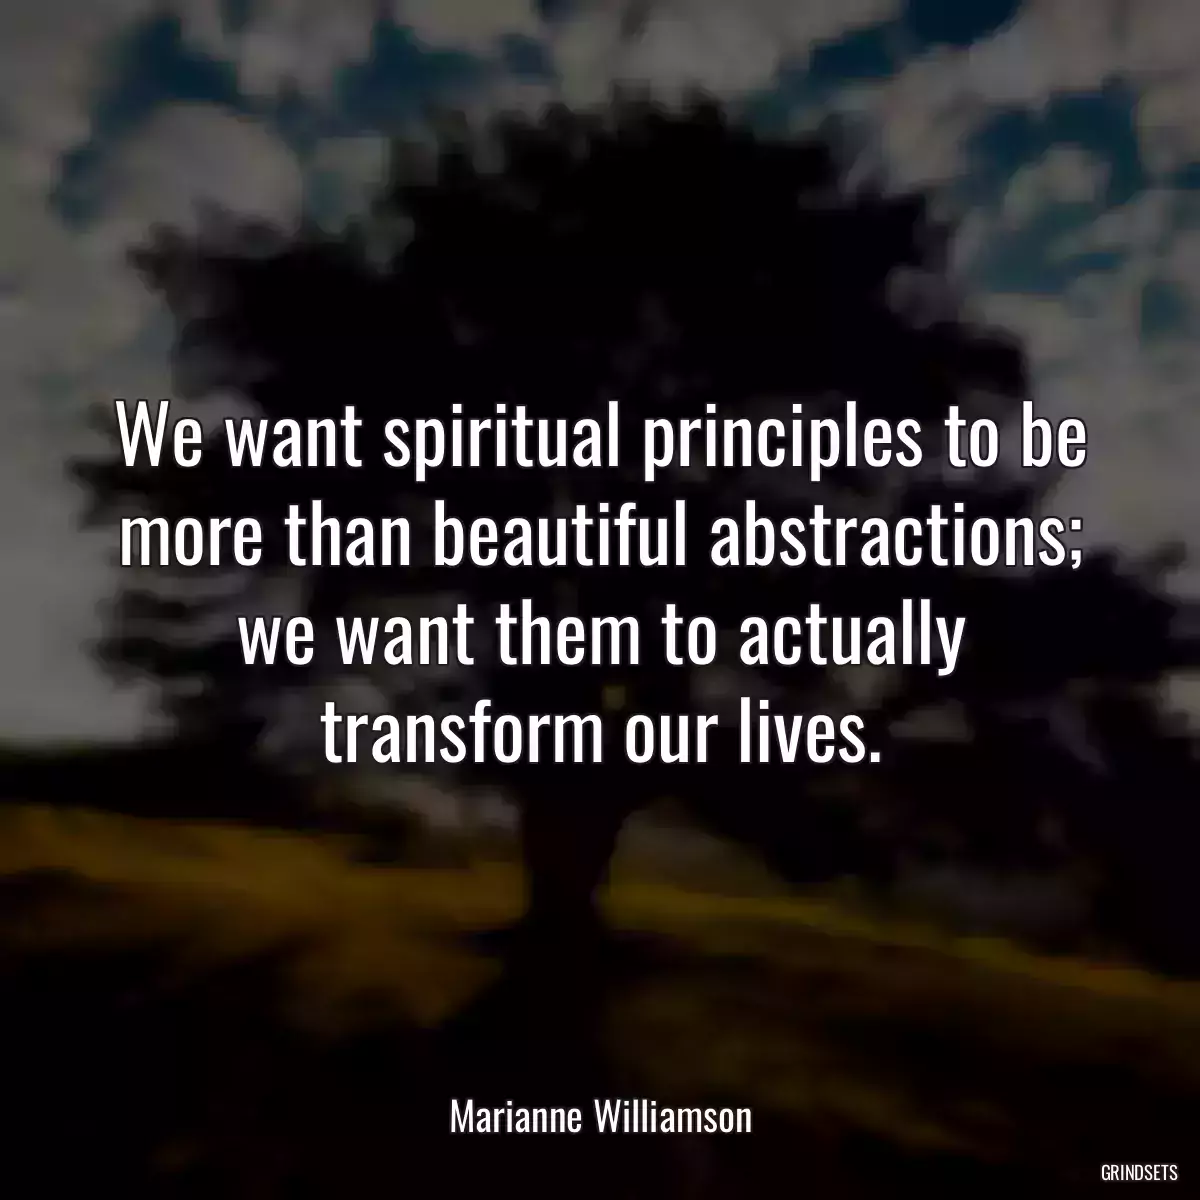 We want spiritual principles to be more than beautiful abstractions; we want them to actually transform our lives.